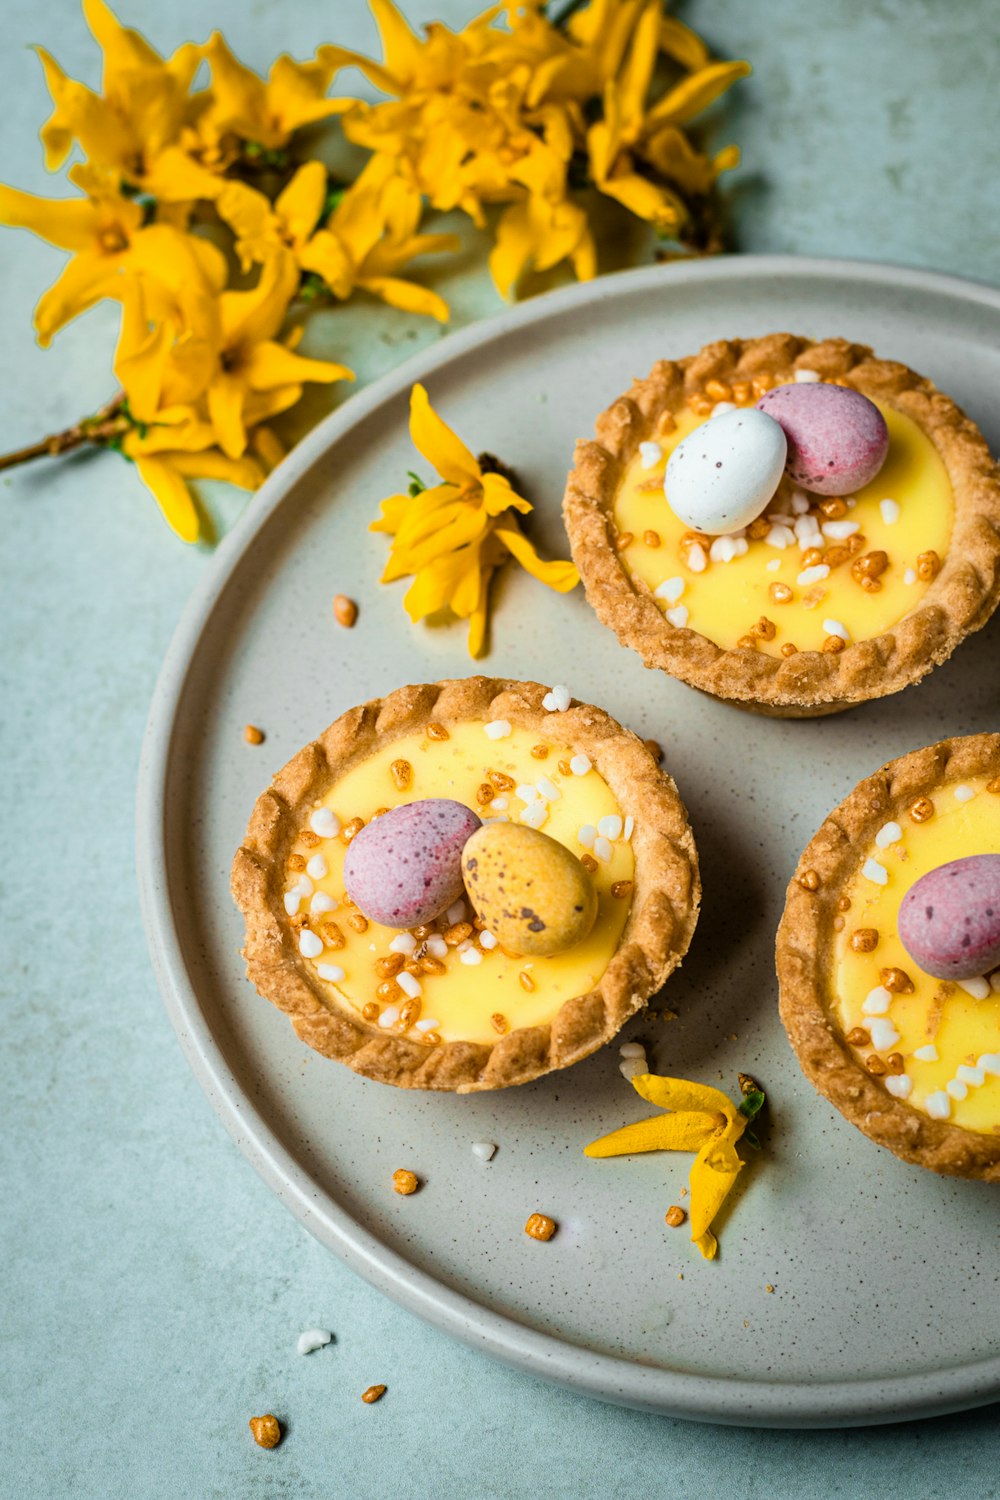 three small desserts on a plate with yellow flowers